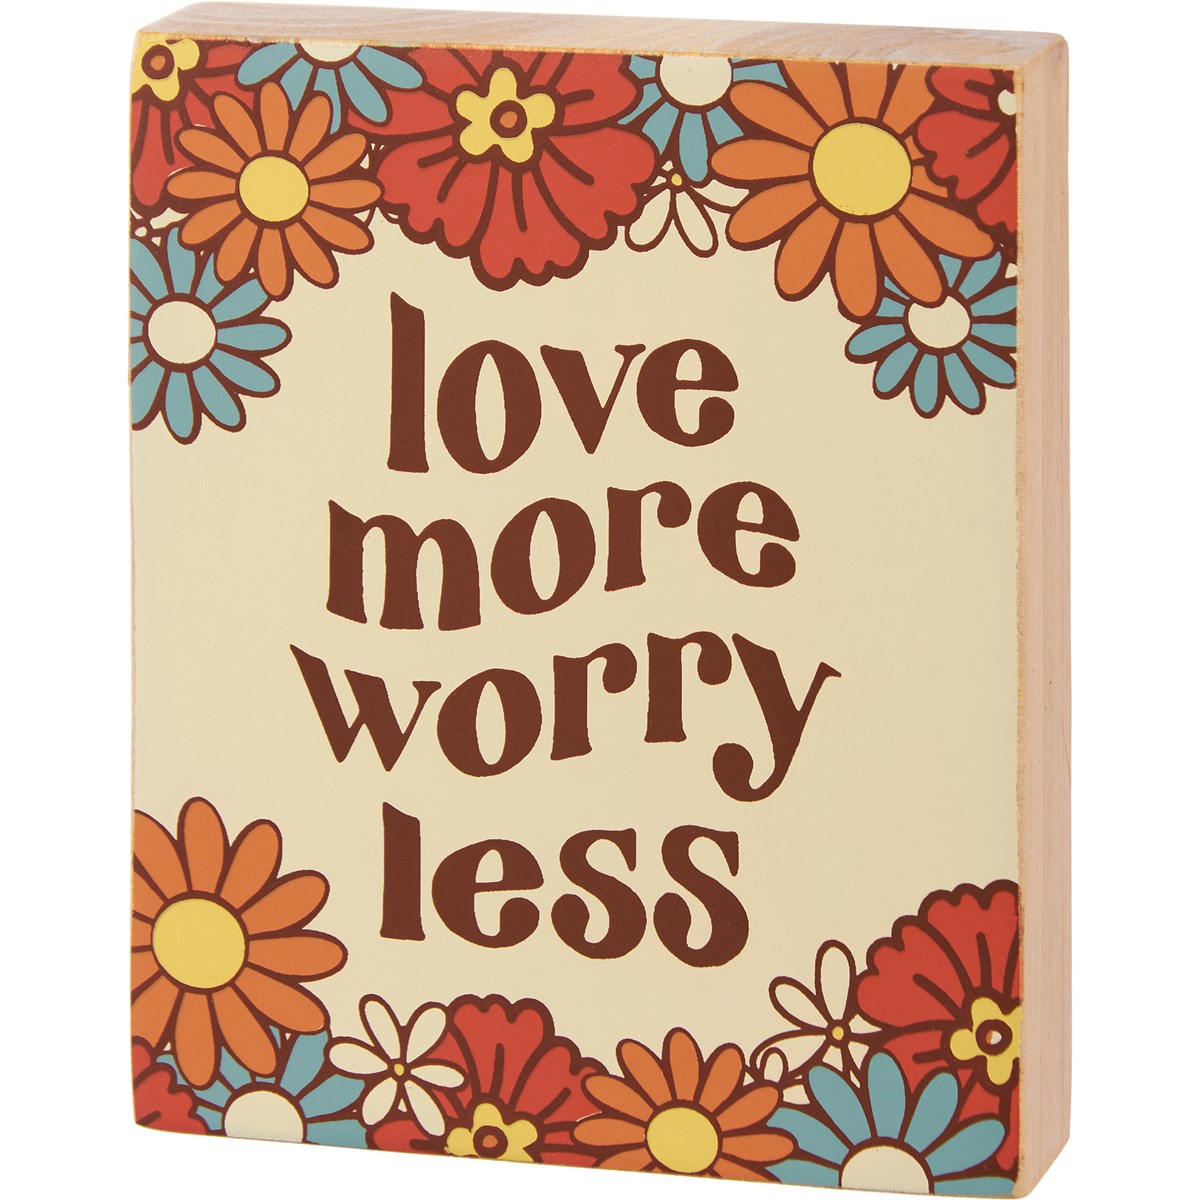 Block Sign - Love More Worry Less - 4" x 5" x 1" - Wood